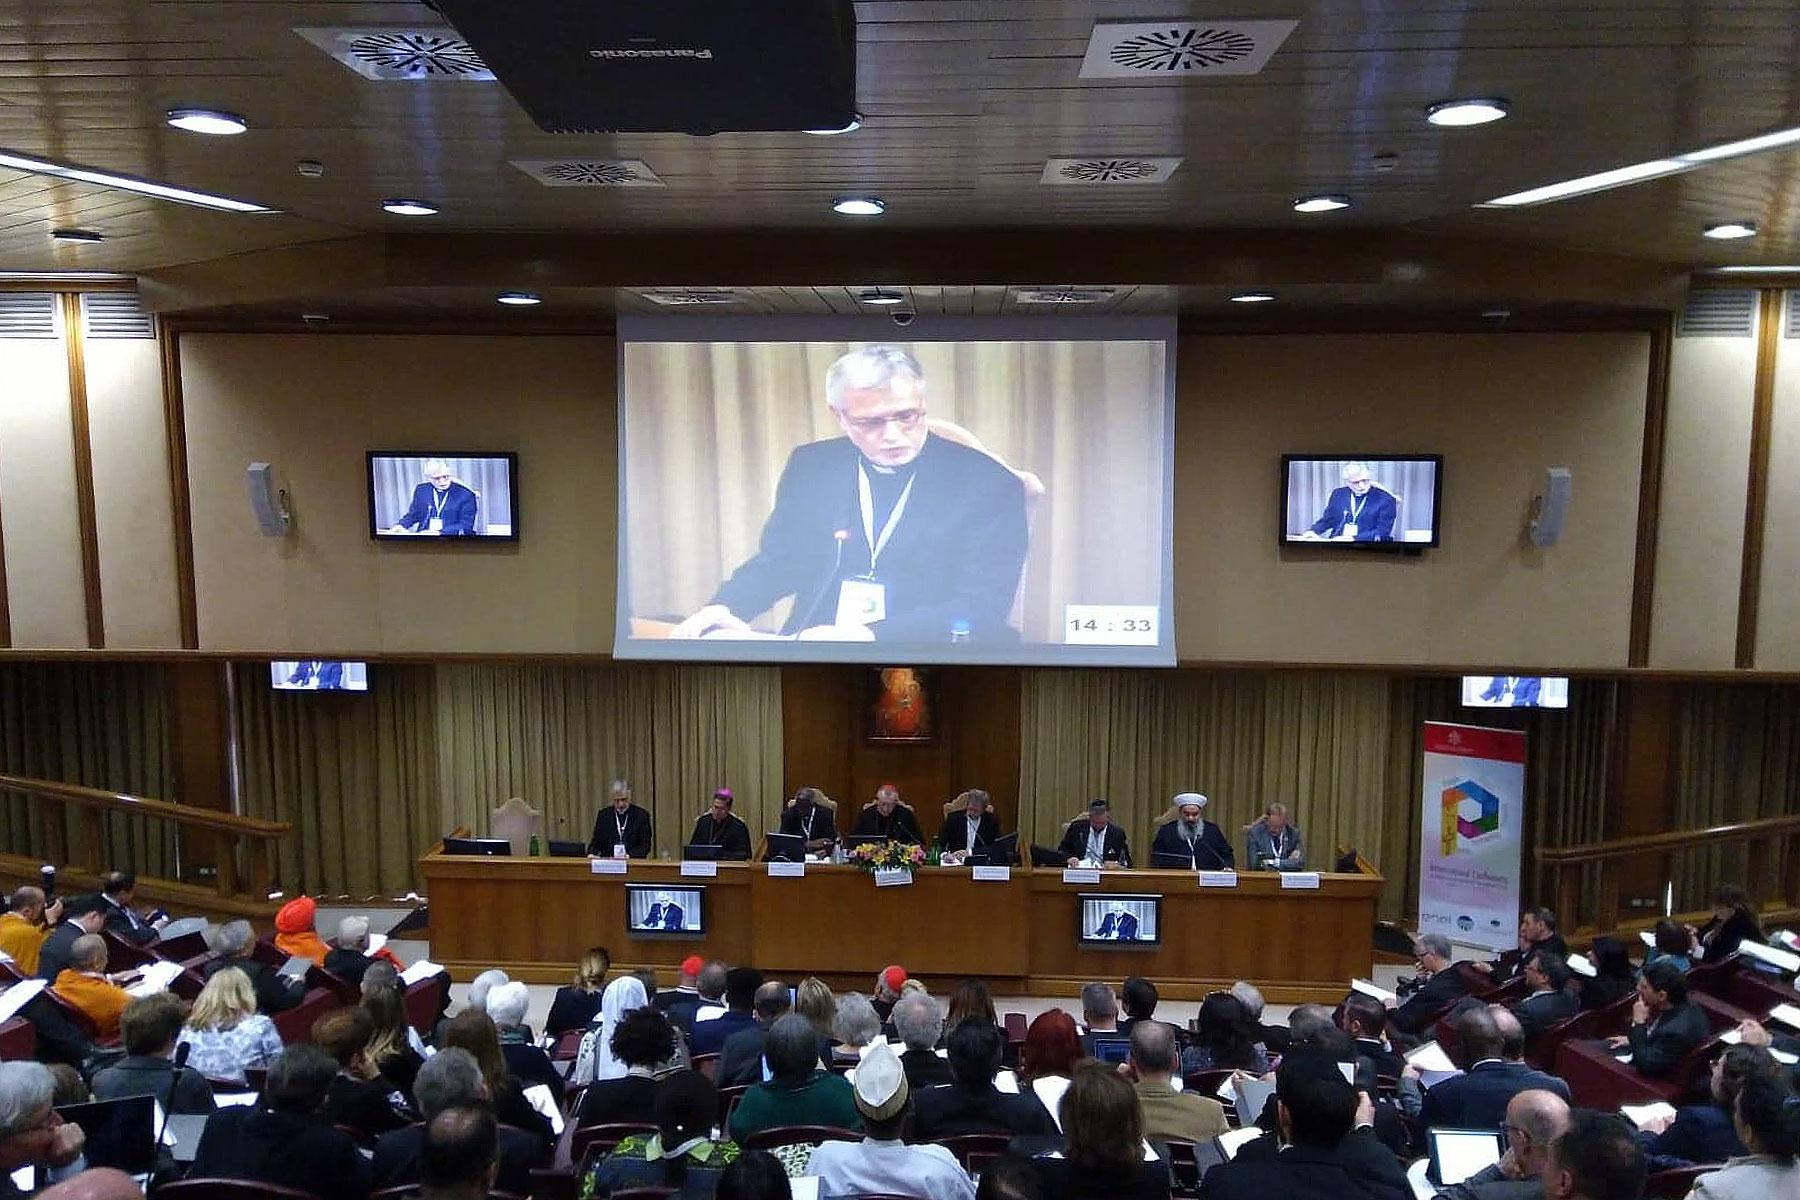 LWF General Secretary Rev. Dr. Martin Junge speaks at an interfaith panel on the opening day of the Vatican conference on Religions and the Sustainable Development Goals. Photo: GCCM